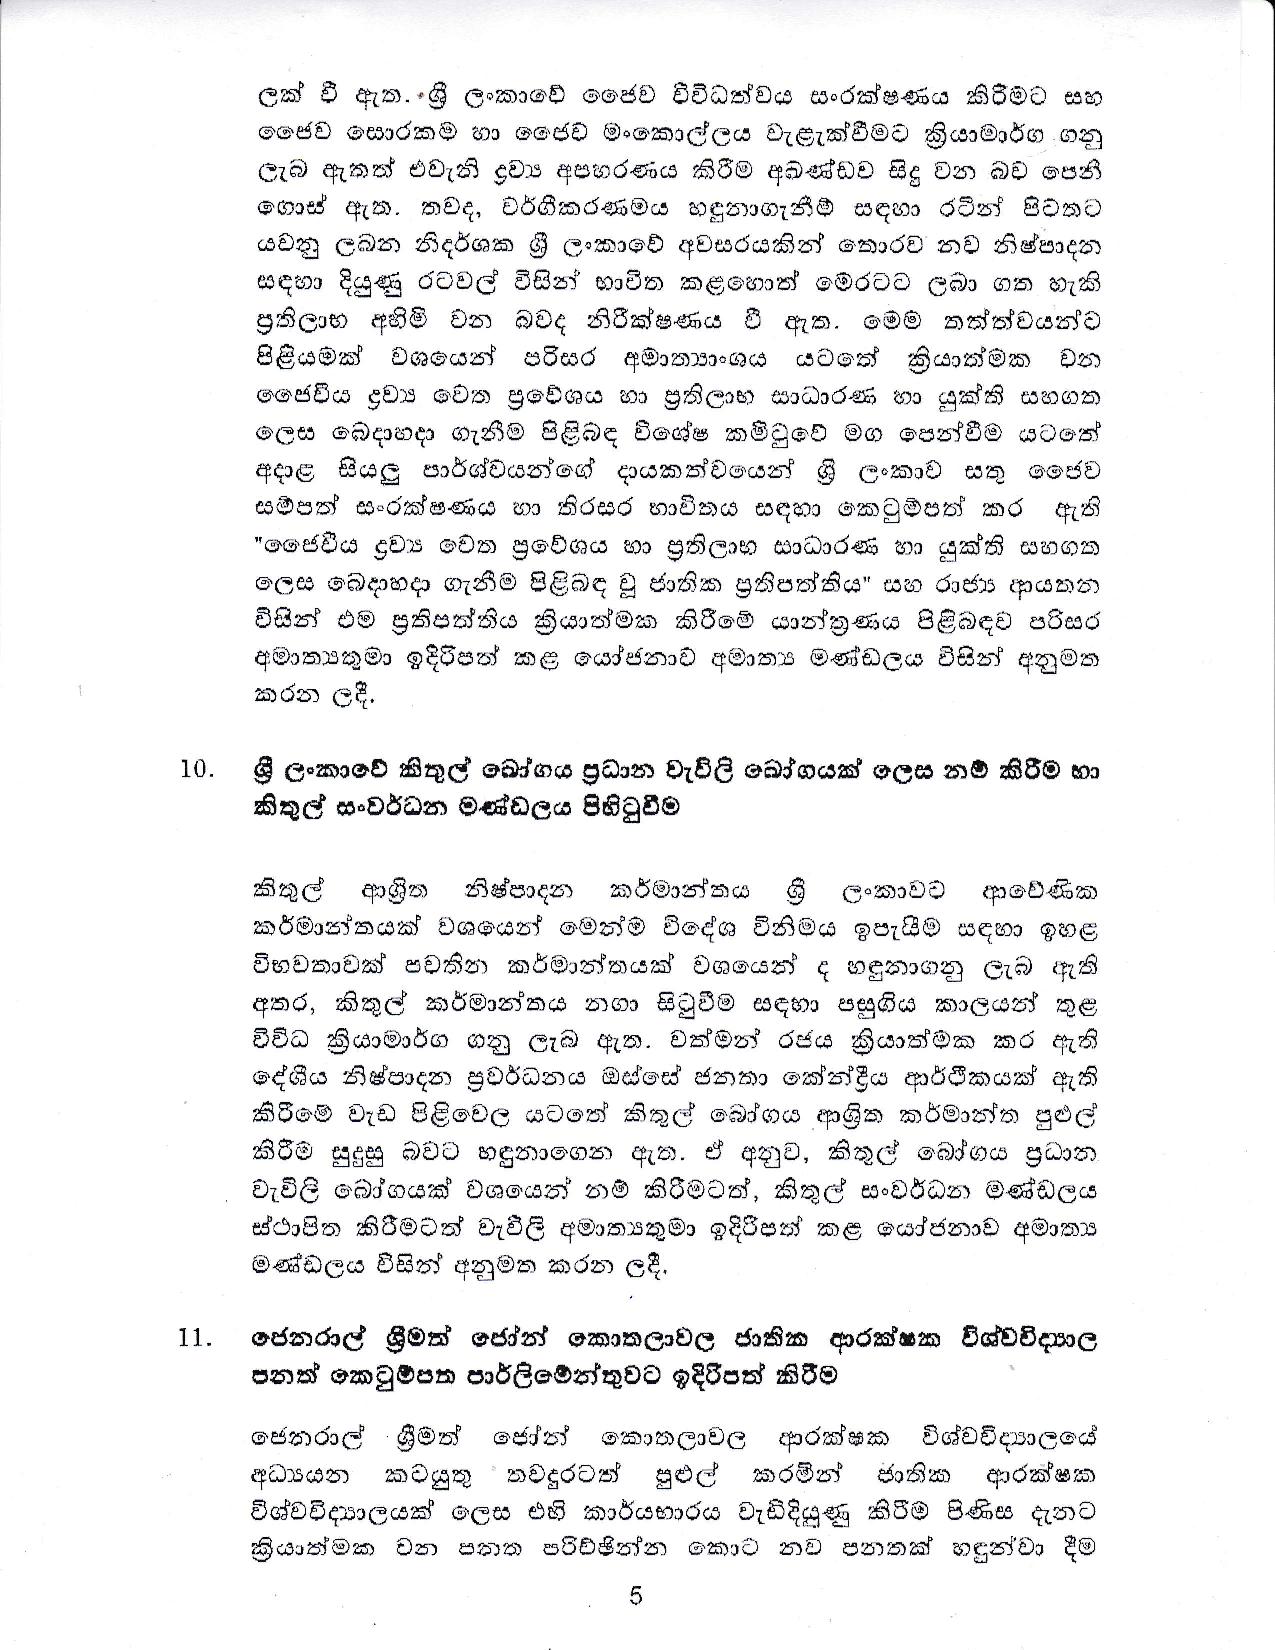 Cabinet Decision on 14.12.2020 page 005